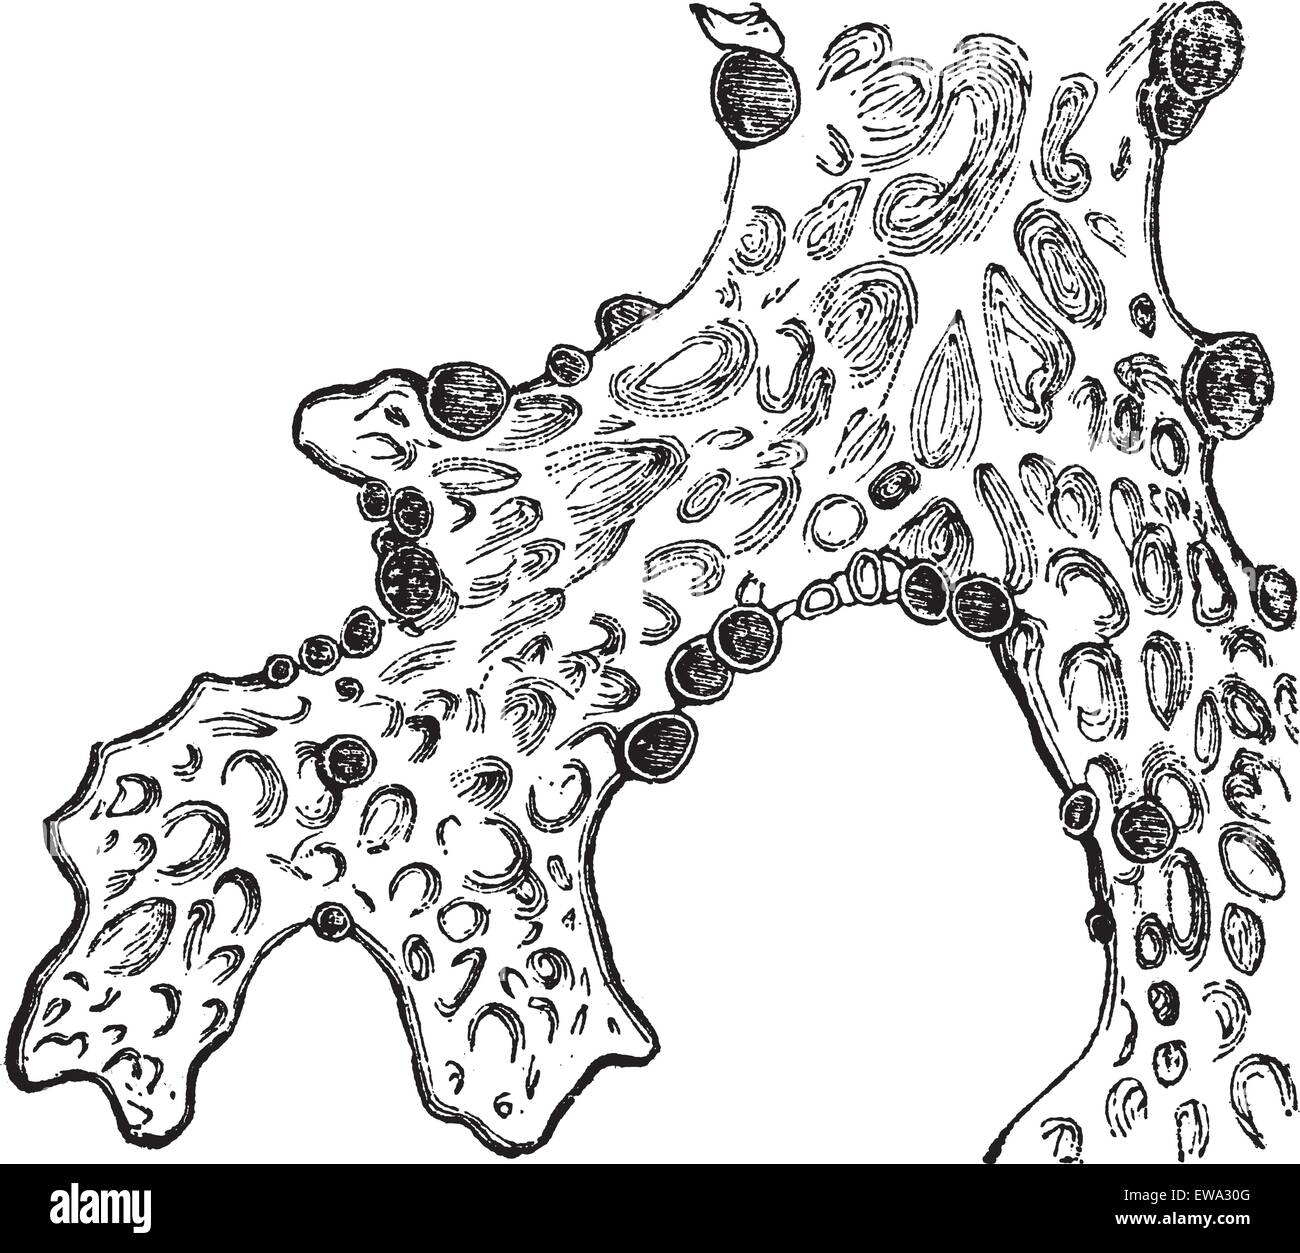 Lung lichen (Sticta pulmonacea) or lung lichen or Lobaria pulmonaria or lungwort lichen or oak lungwort or lung moss vintage engraved illustration. Trousset encyclopedia (1886 - 1891). Stock Vector